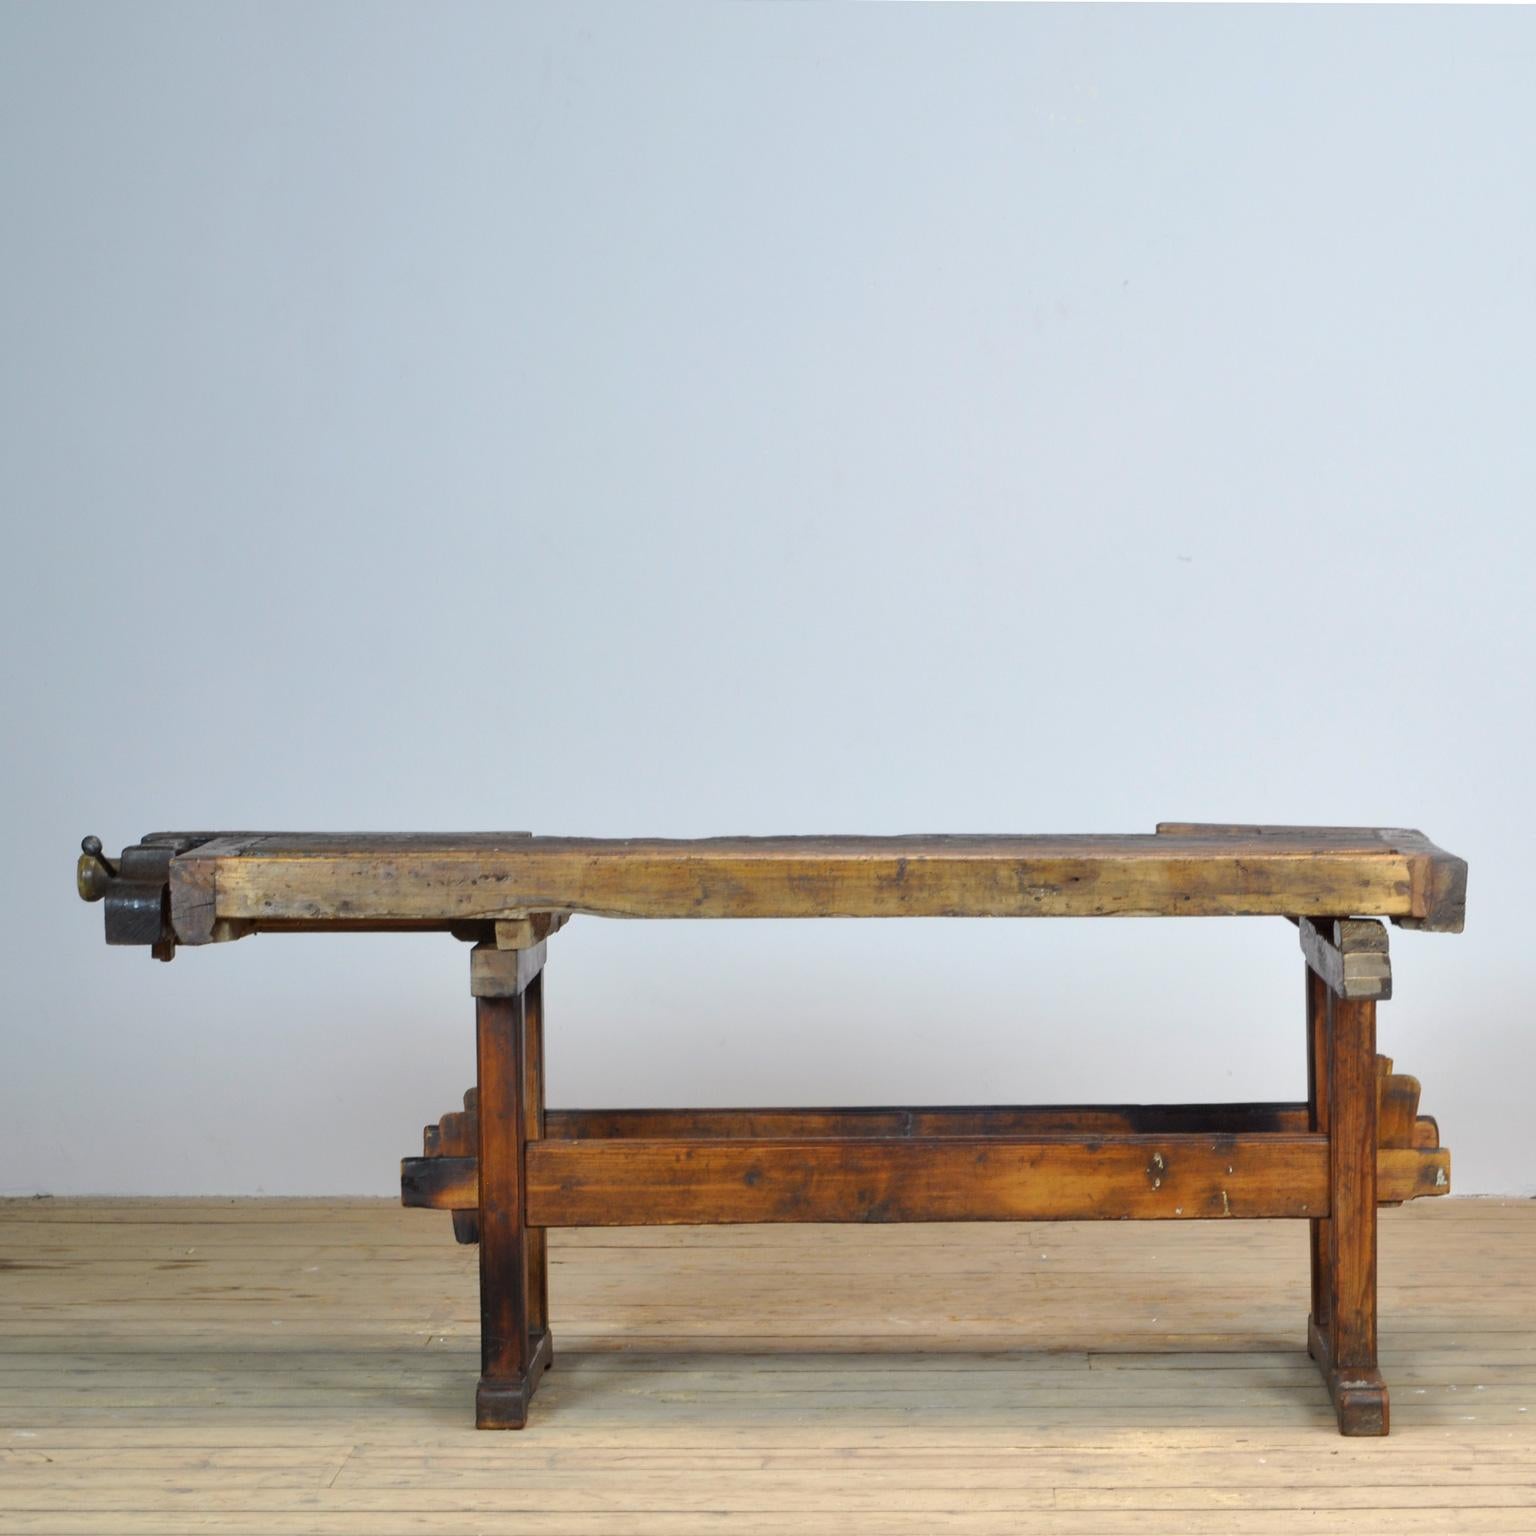 This antique workbench has two built-in vices screws and a recessed tray where the carpenter would put his tools. It was manufactured circa 1920. Made from oak with a pine base. Beautiful patina after years of intensive use. The workbench has been